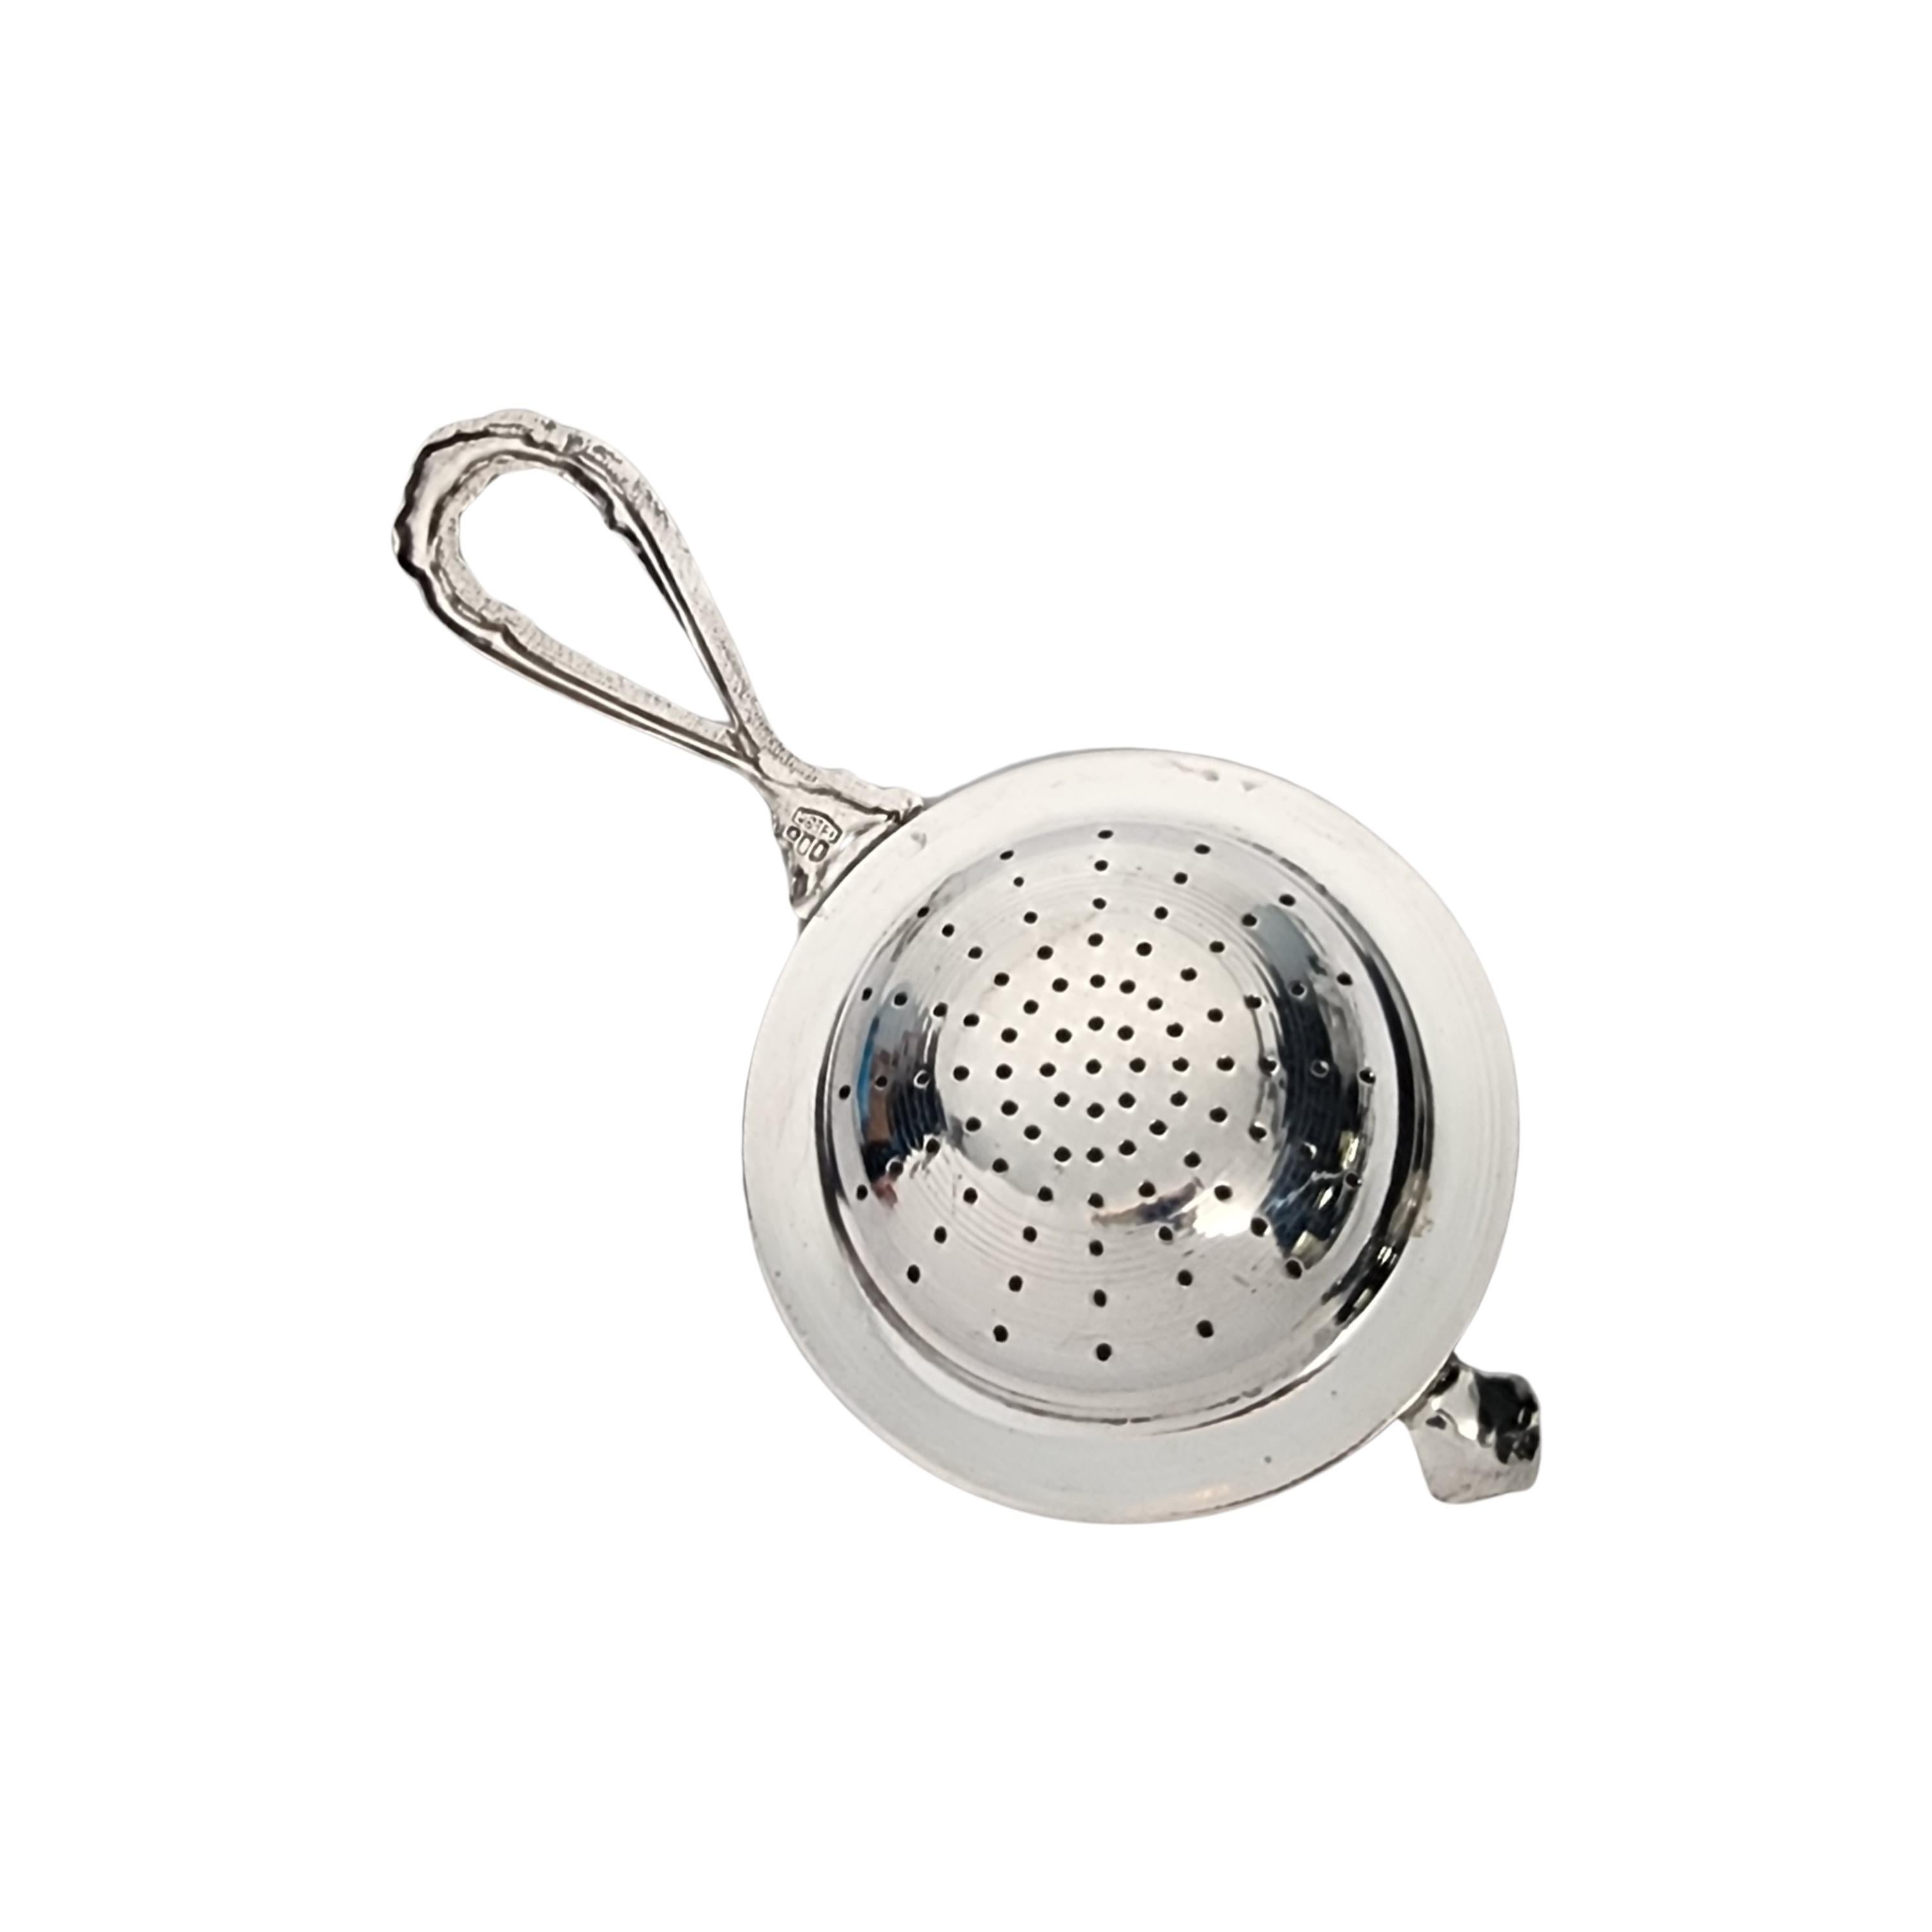 Vintage 800 silver tea strainer by Brandimarte Italy.

This tea strainer features an open loop design handle topped with a rose, and a rope edge design around the pierced bowl.

Measures approx 4 5/8